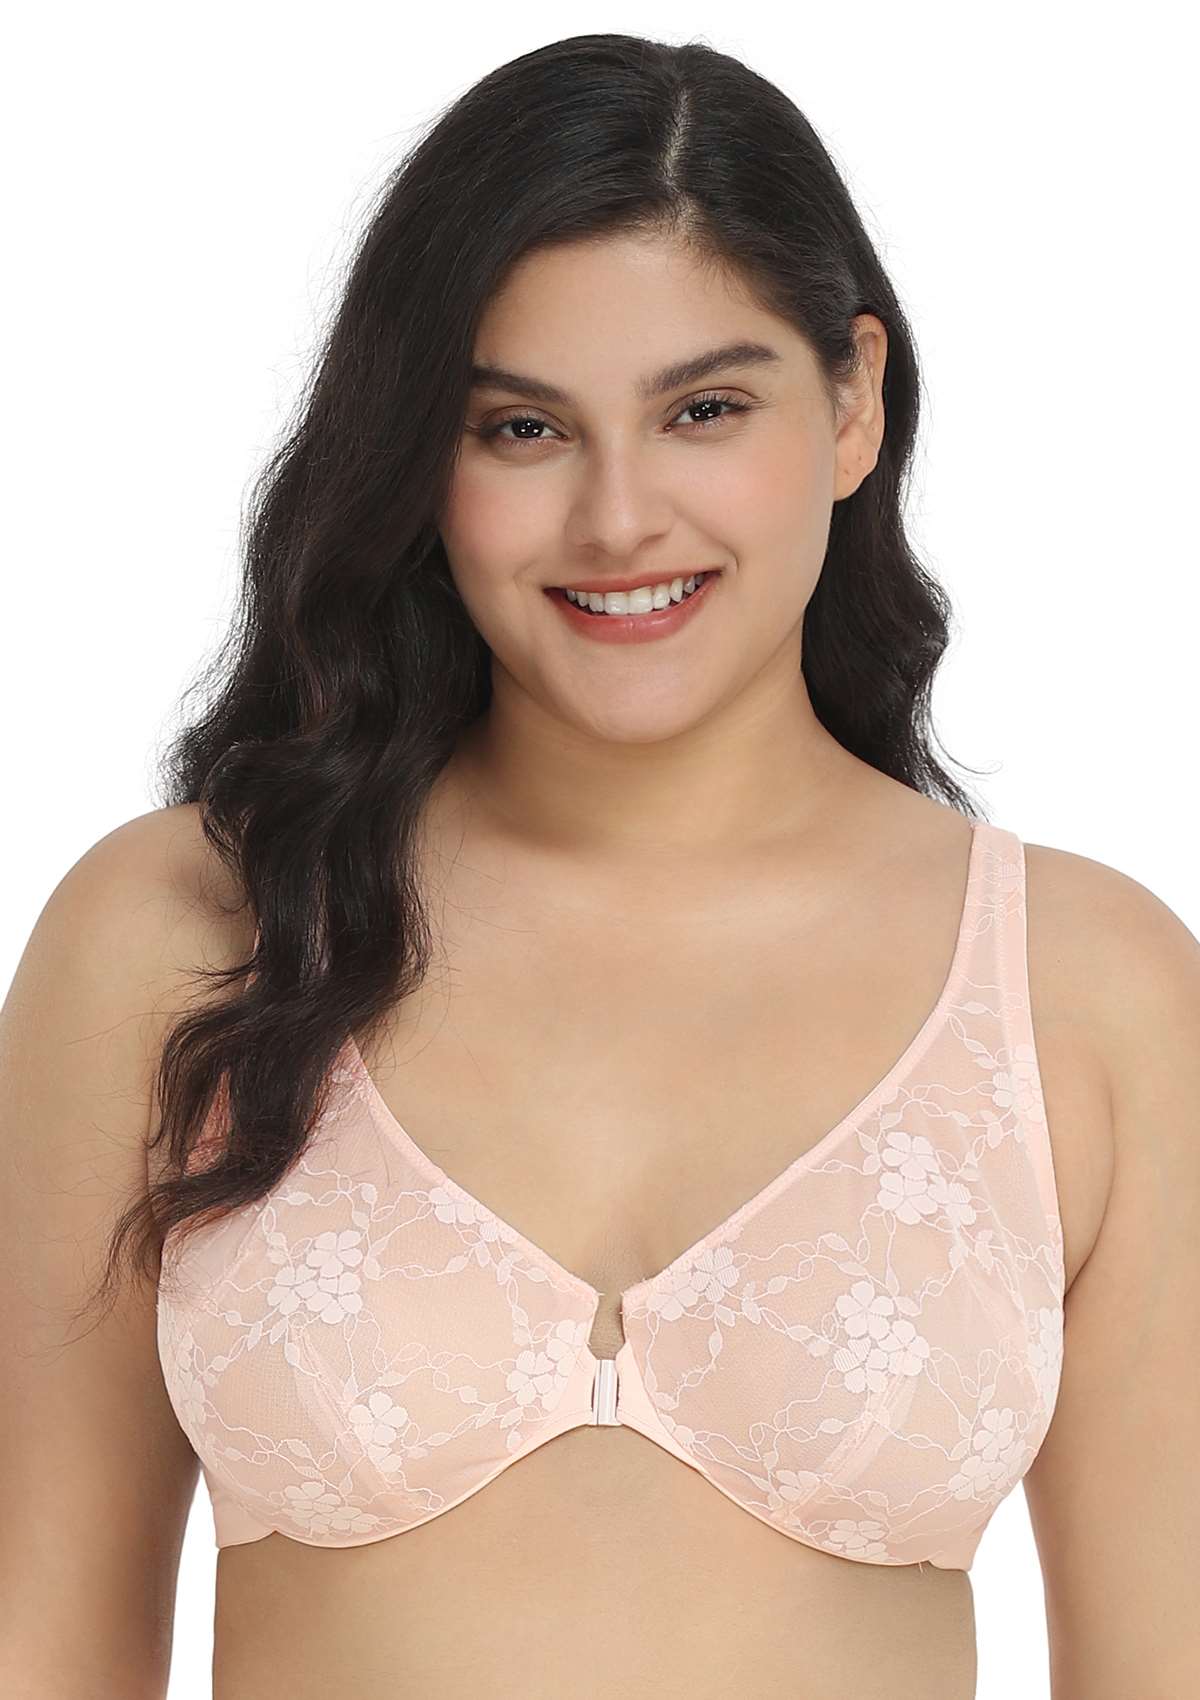 HSIA Spring Romance Front-Close Floral Lace Unlined Full Coverage Bra - Black / 34 / DD/E